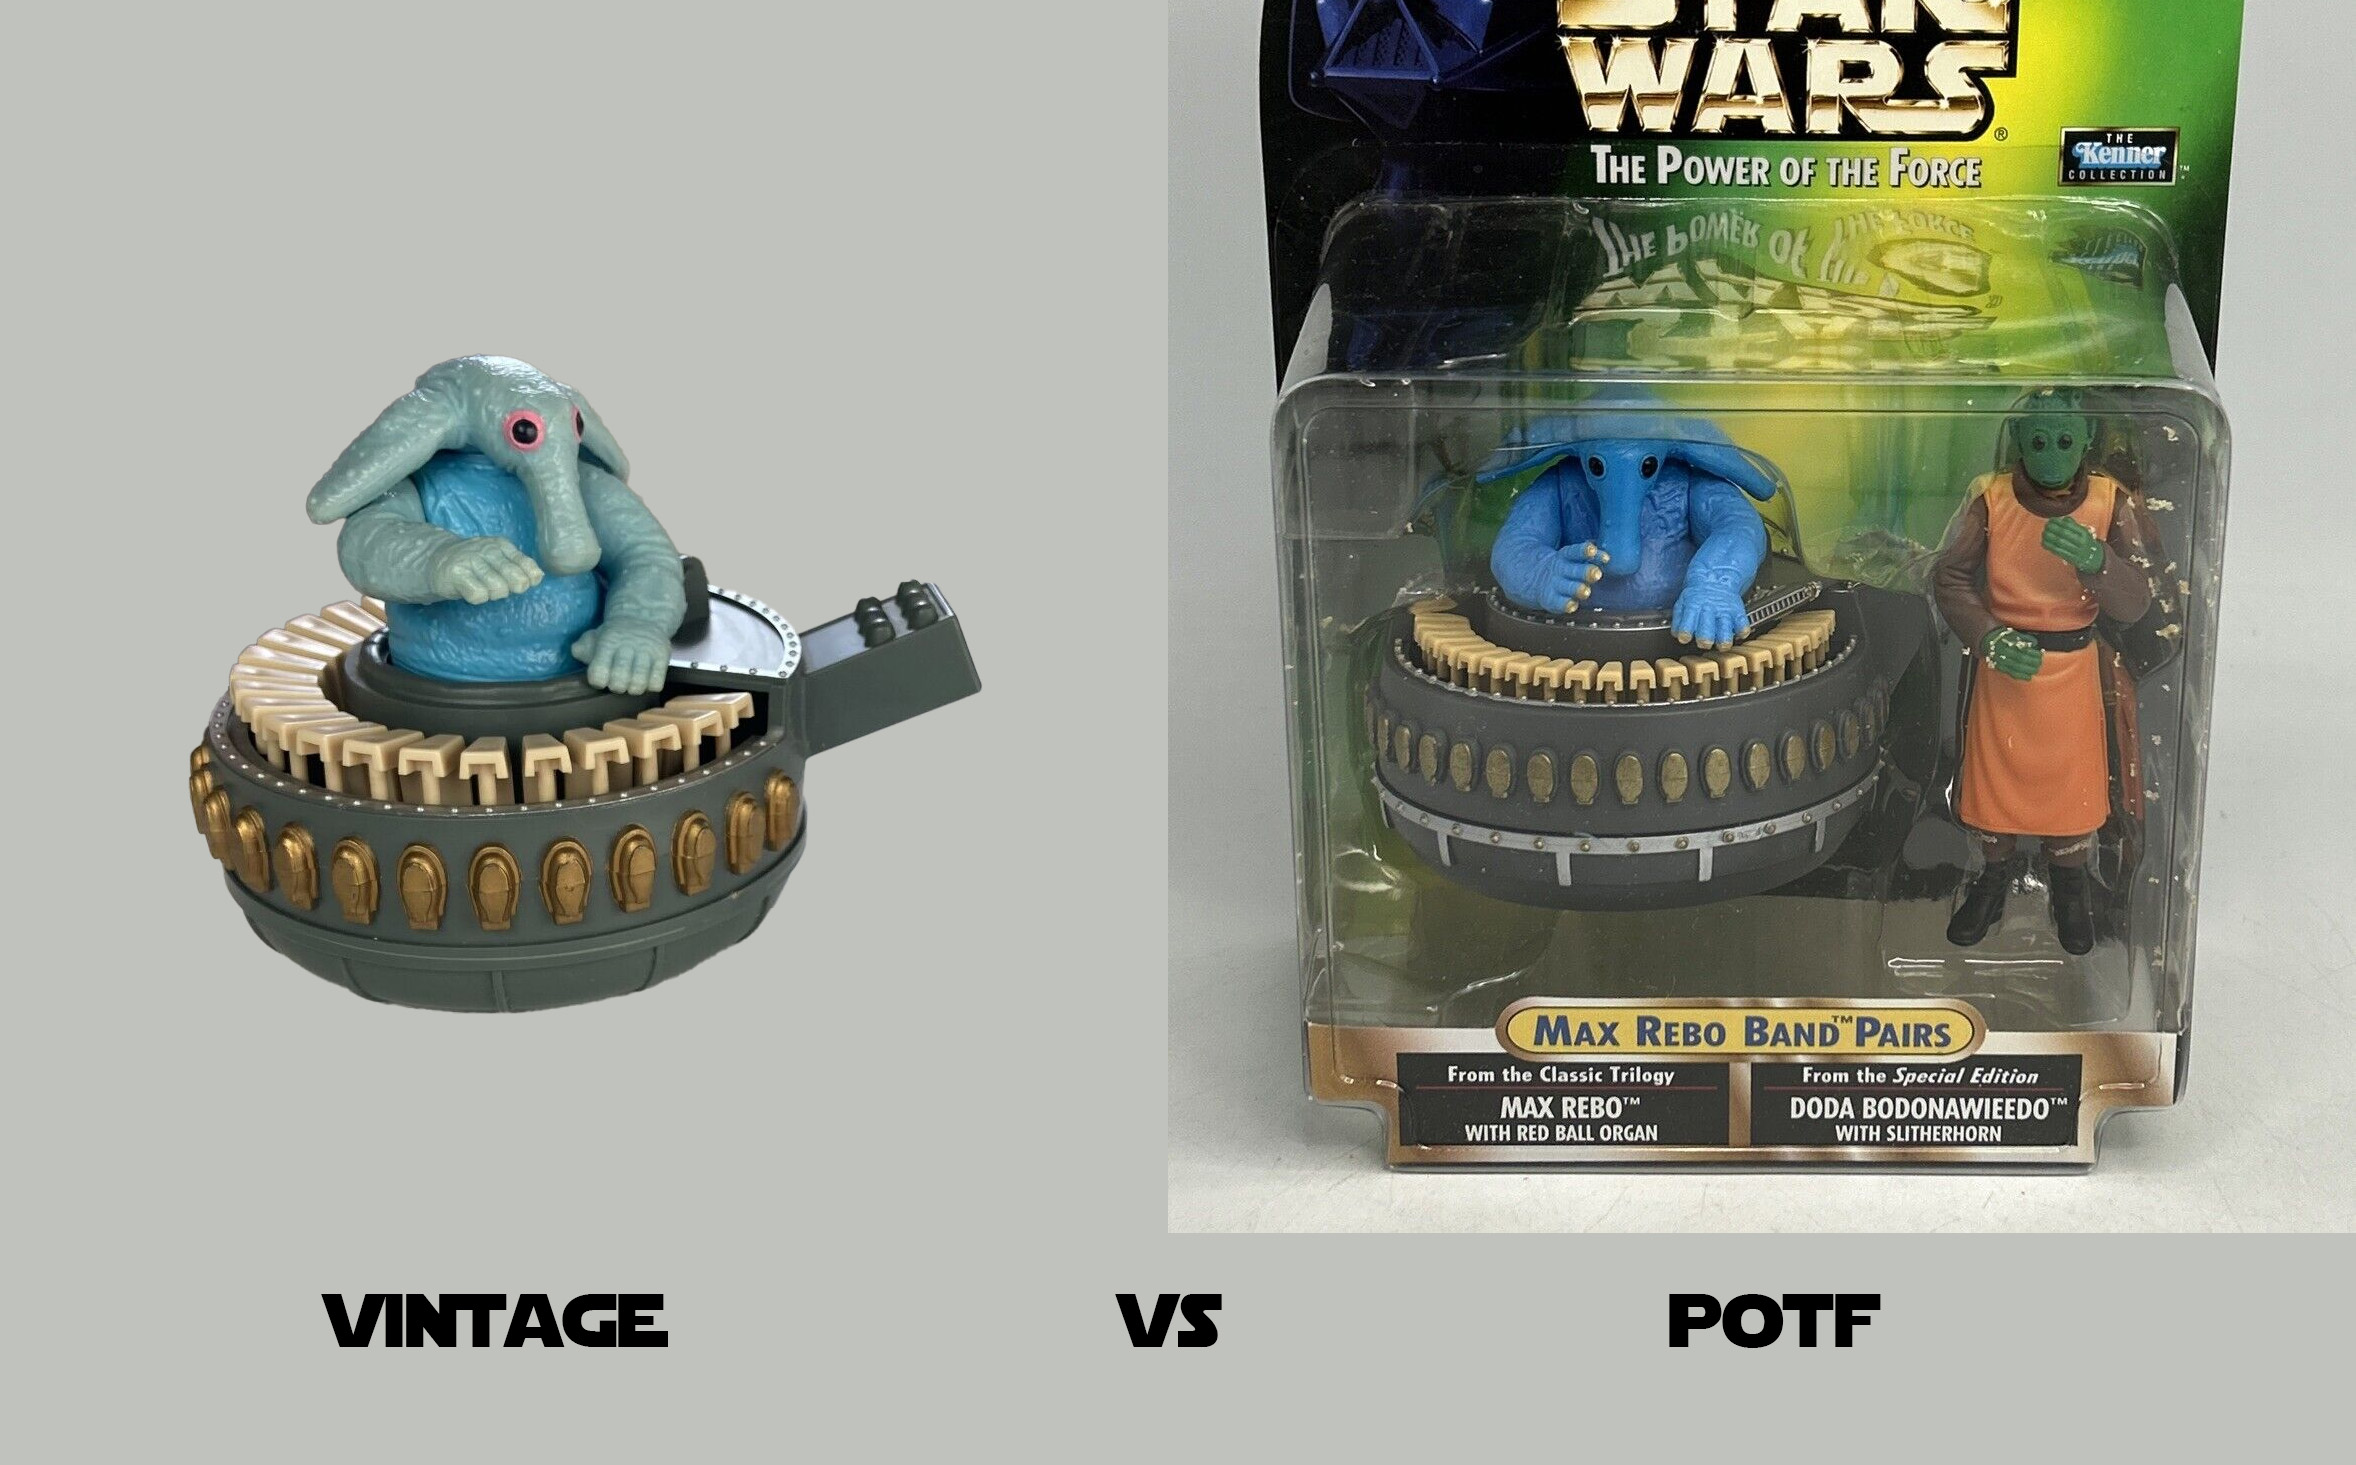 The differences between the vintage Star Wars Max Rebo and the later POTF version.